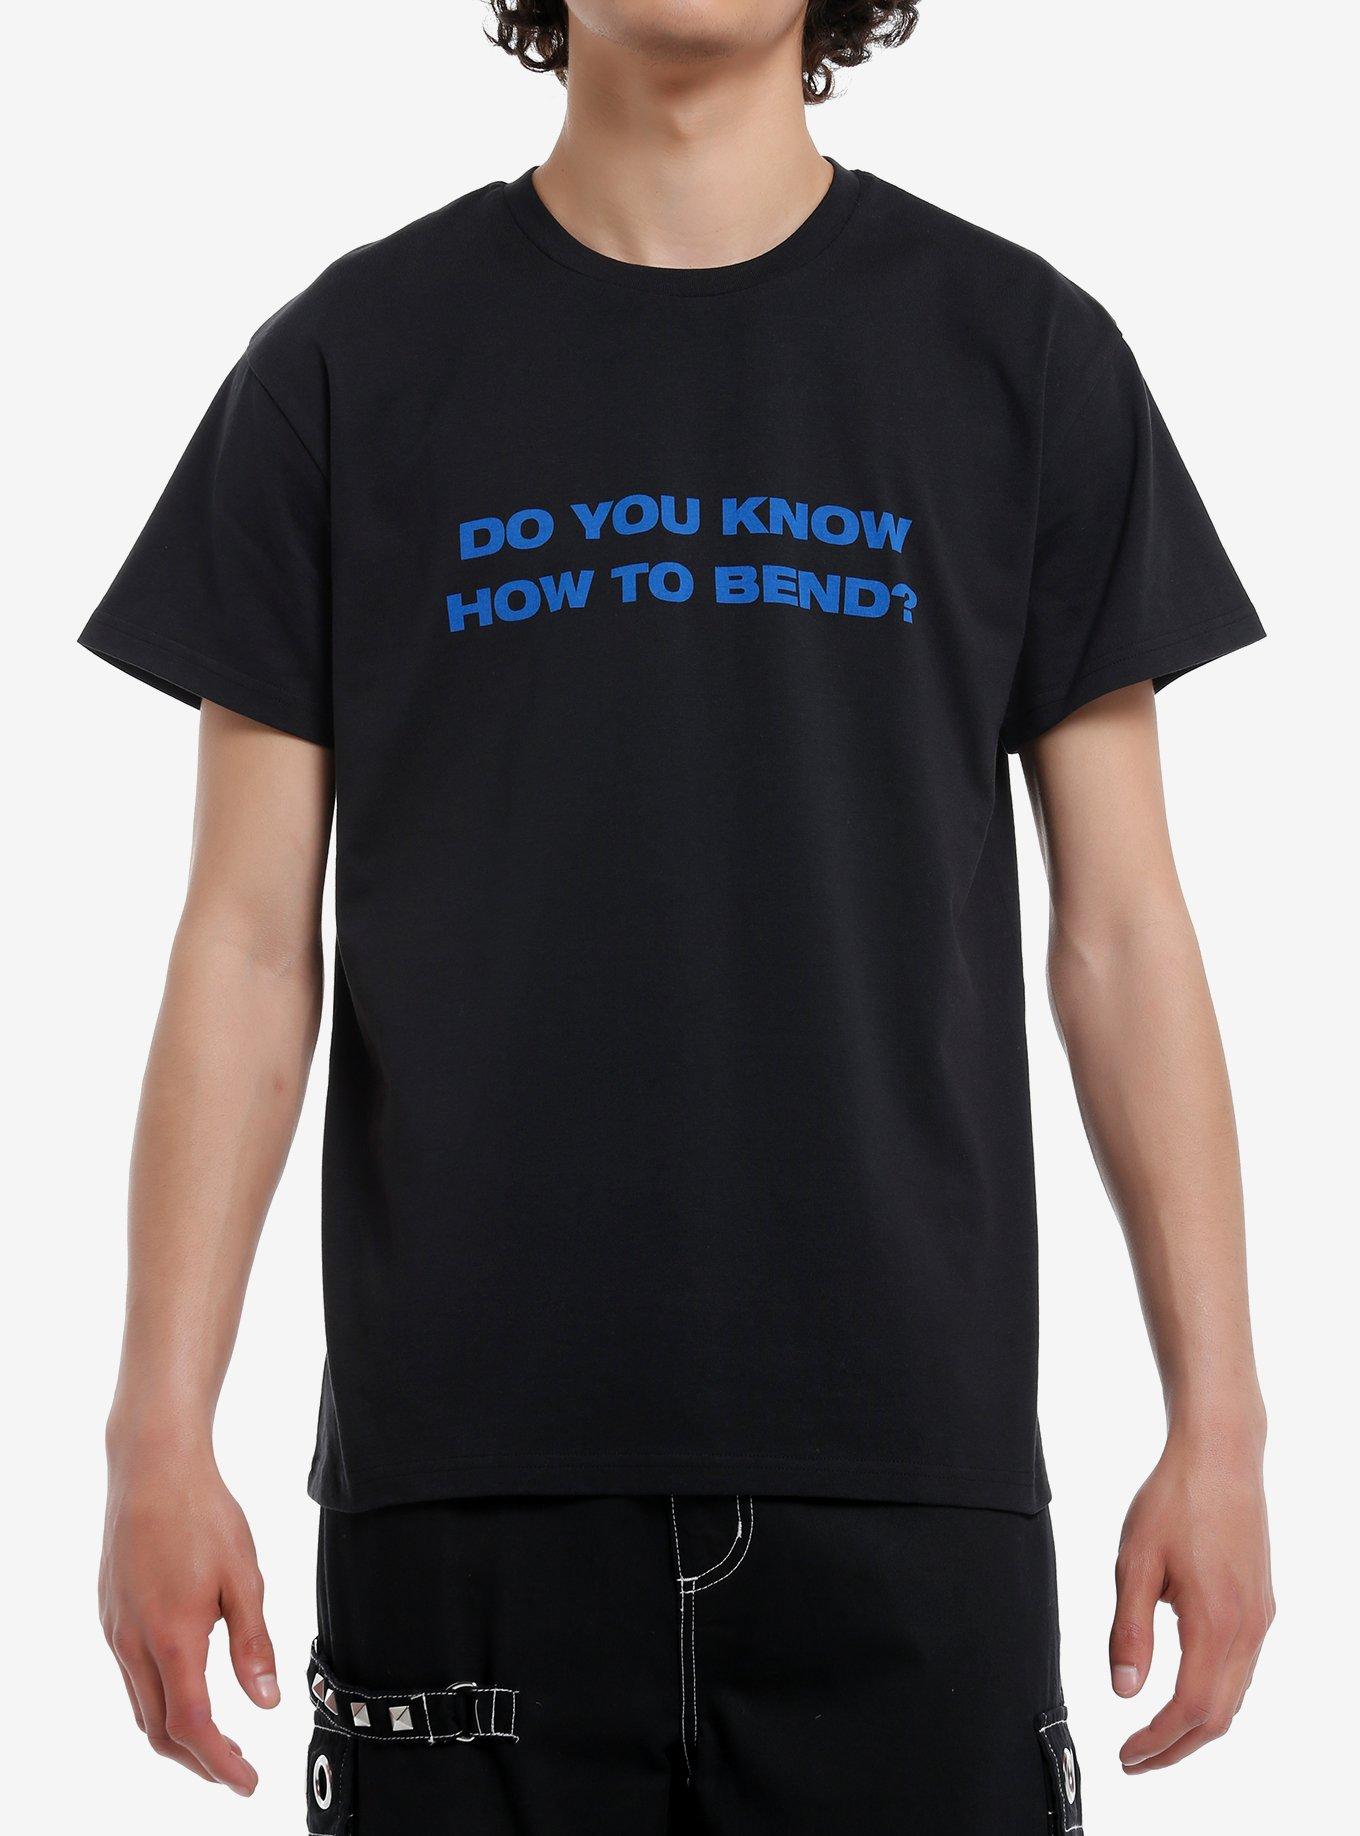 Billie Eilish Do You Know How To Bend? T-Shirt Hot Topic Exclusive, BLACK, hi-res